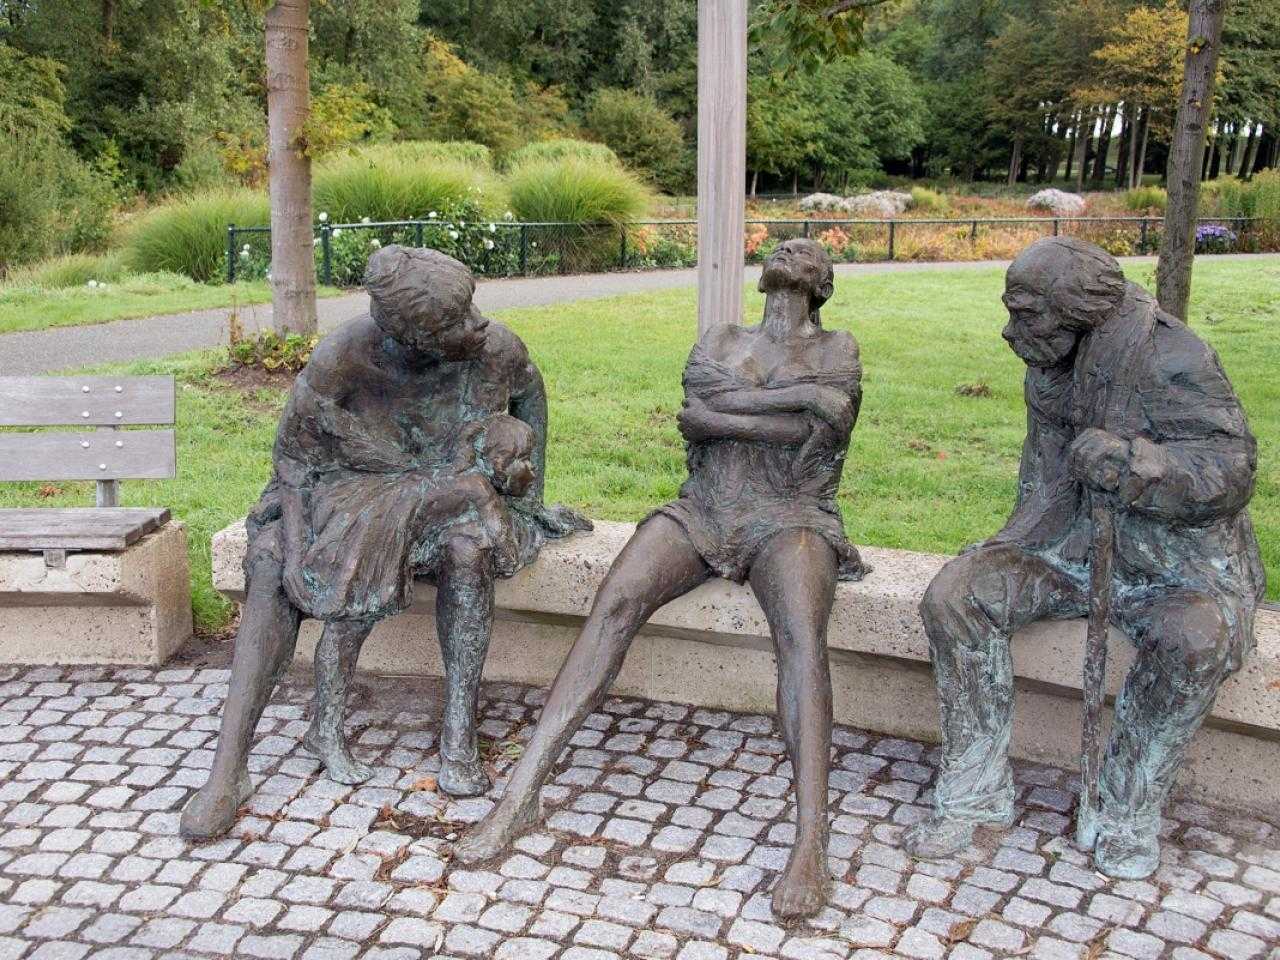 Sculpture Karel Gomes in Haarlemmermeerse Bos. Recreationists: a woman with a baby on her lap has a chat with an old man. Between them, on the bench at the edge of the lake, a young girl is sunbathing